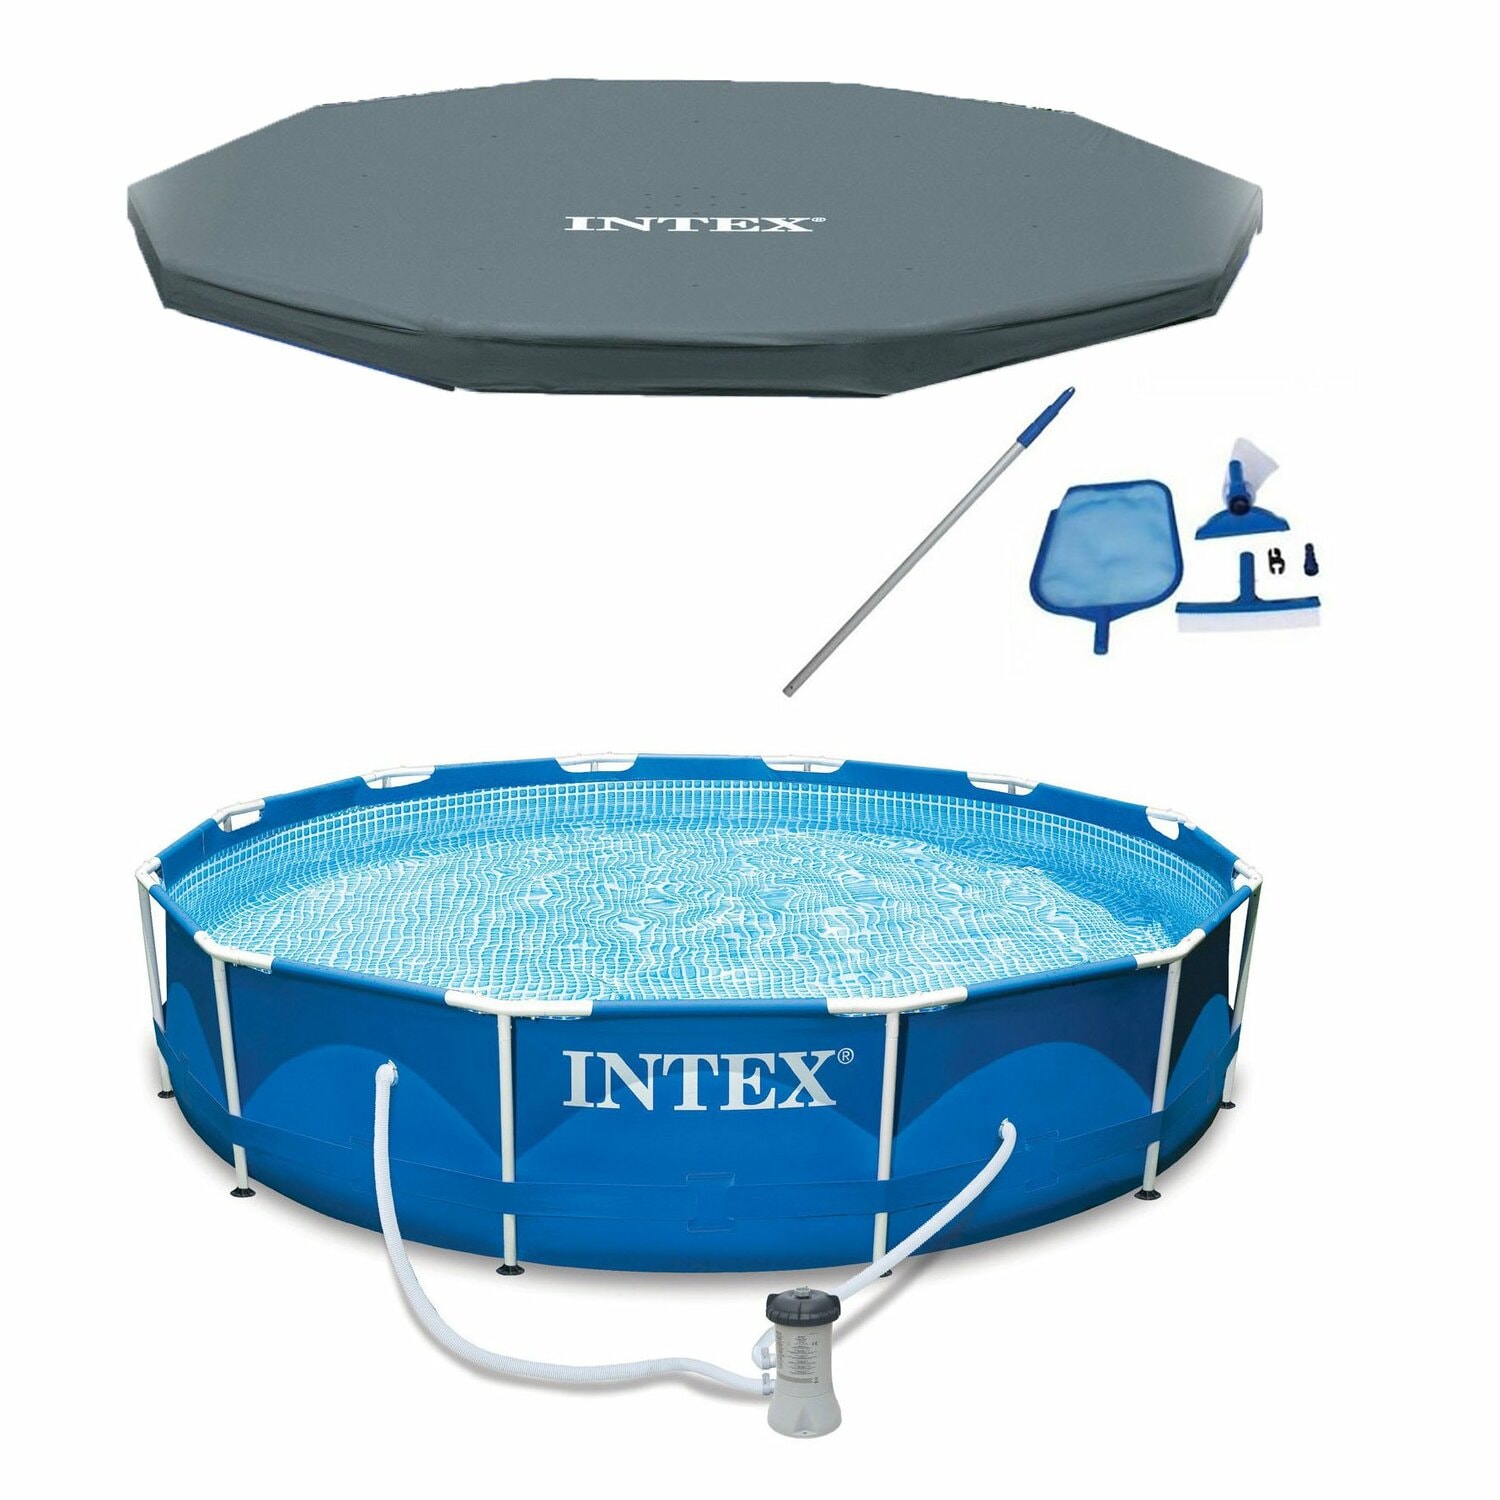 Intex 12' x 30'' Metal Frame Above Ground Swimming Pool with Filter Pump 